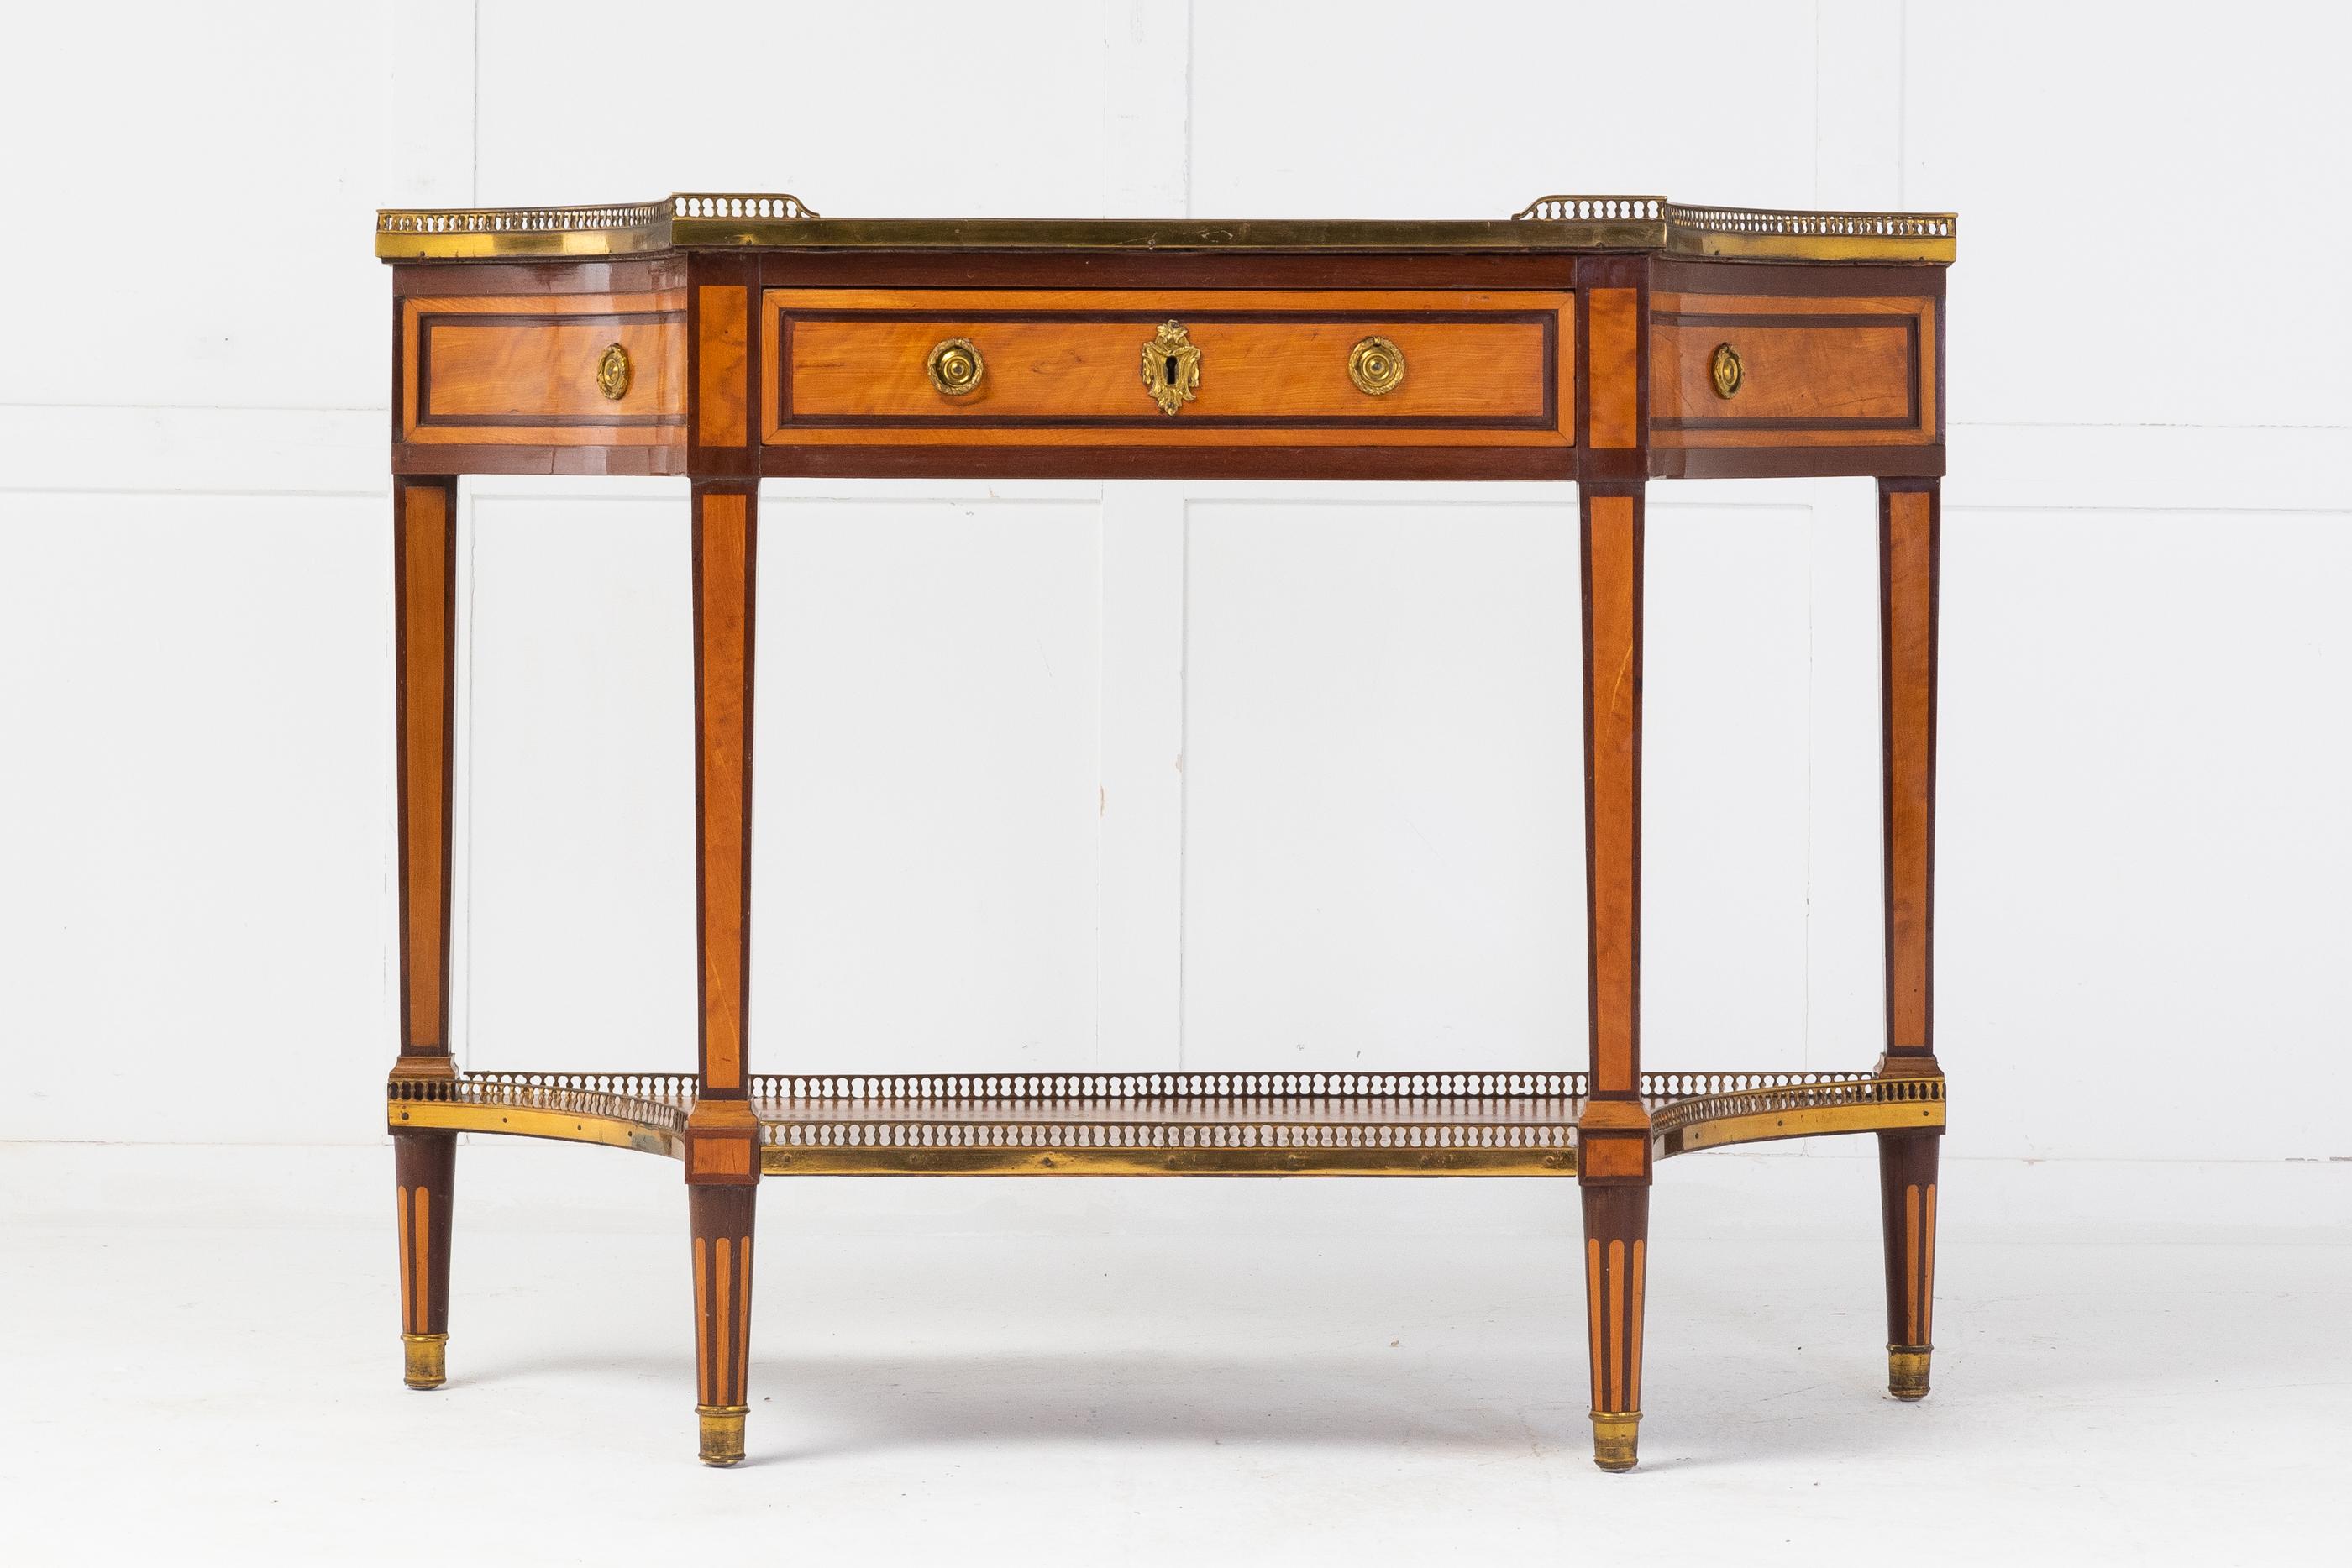 19th century French mahogany and satinwood console table with marble top and brass gallery. Having concave-sided rectangular top with an inset white marble. With a three-quarter pierced gallery, above a panelled frieze drawer with edge banding and